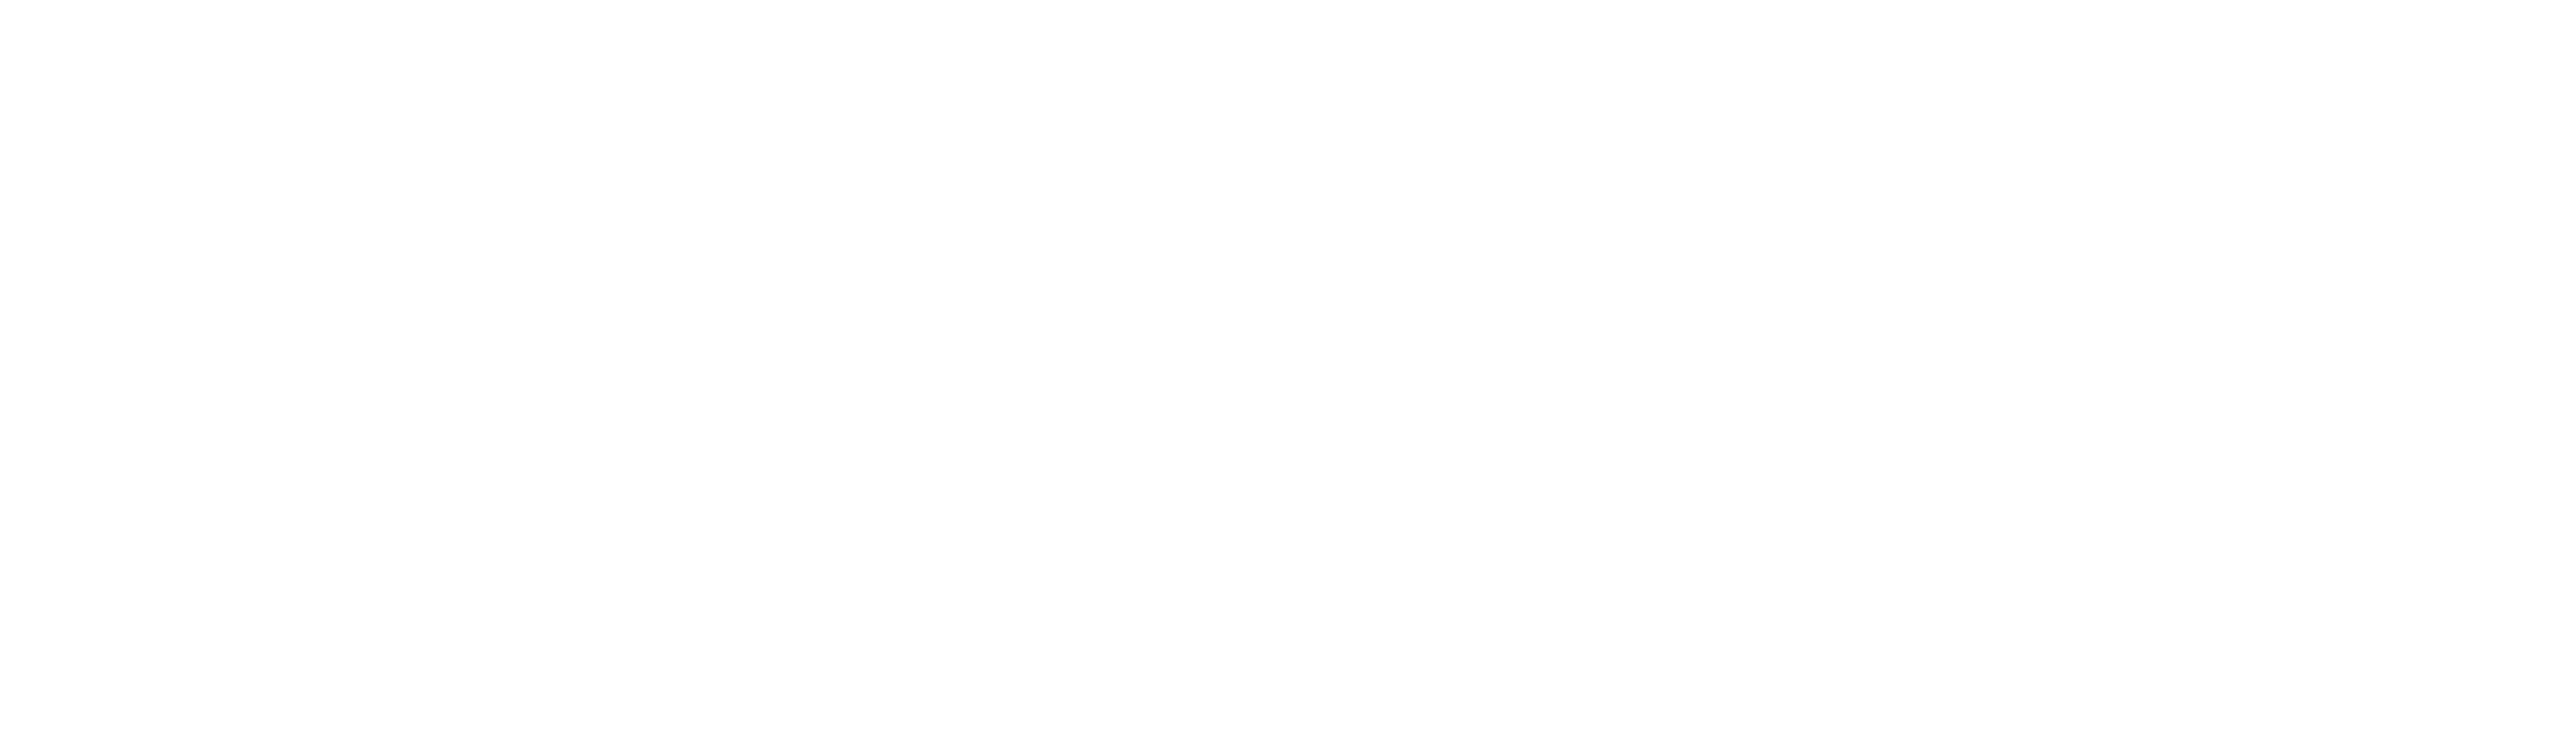 PHSU Text Signup - Ponce Health Sciences University